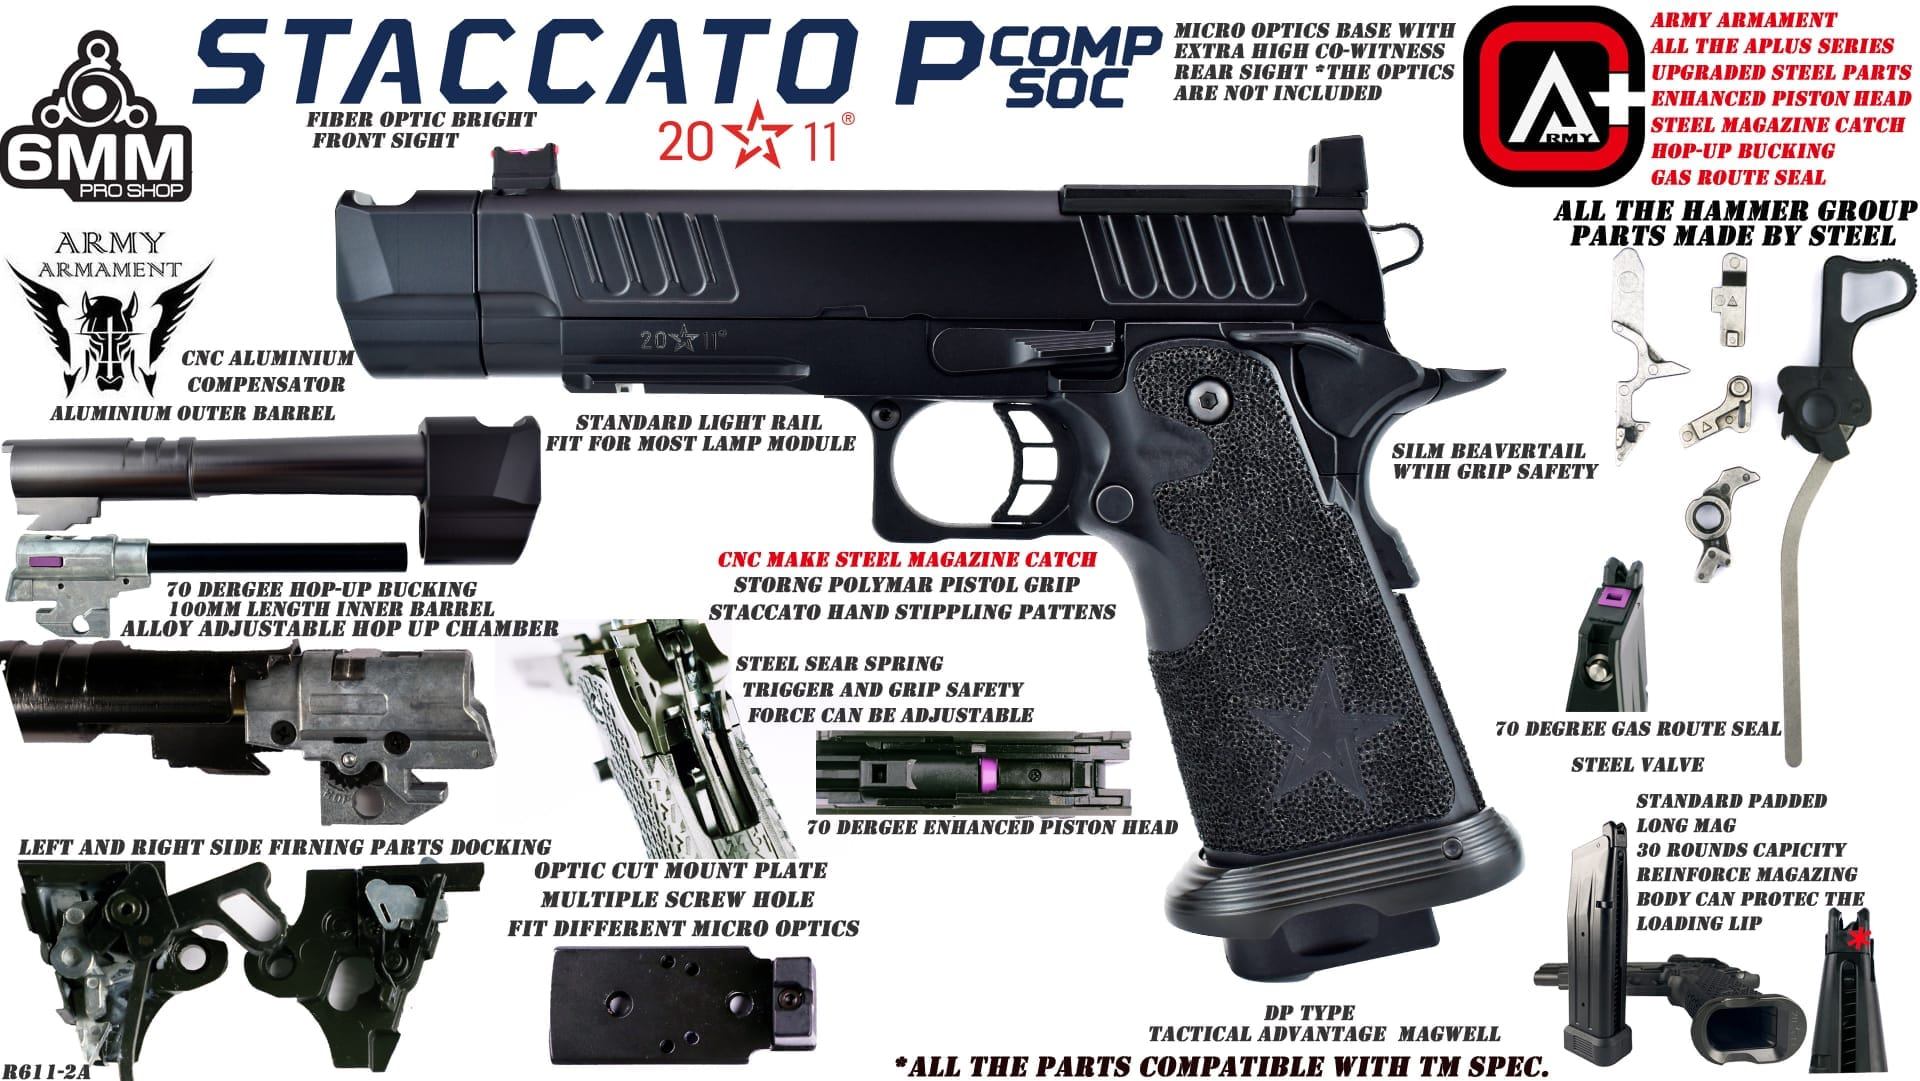 Army Armament Staccato C2 Comp Soc